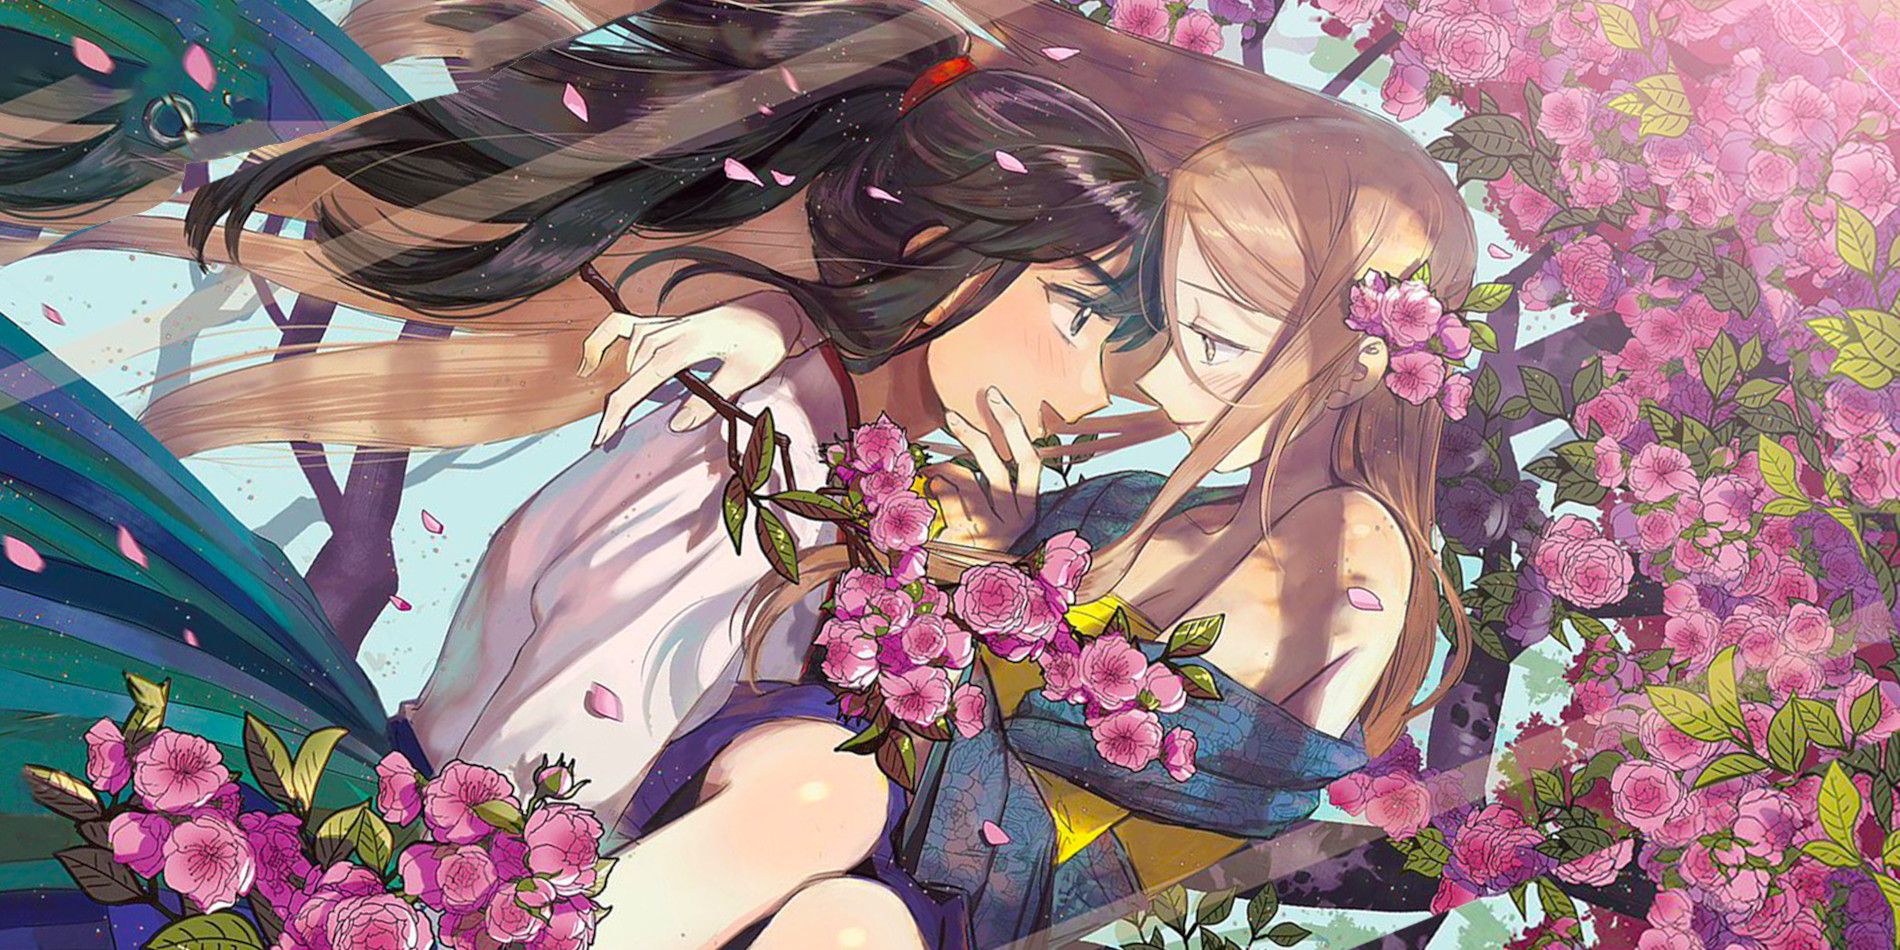 Shim Chong and the wife of Chancellor Jang embrace and are about to kiss among flowers in the manwha